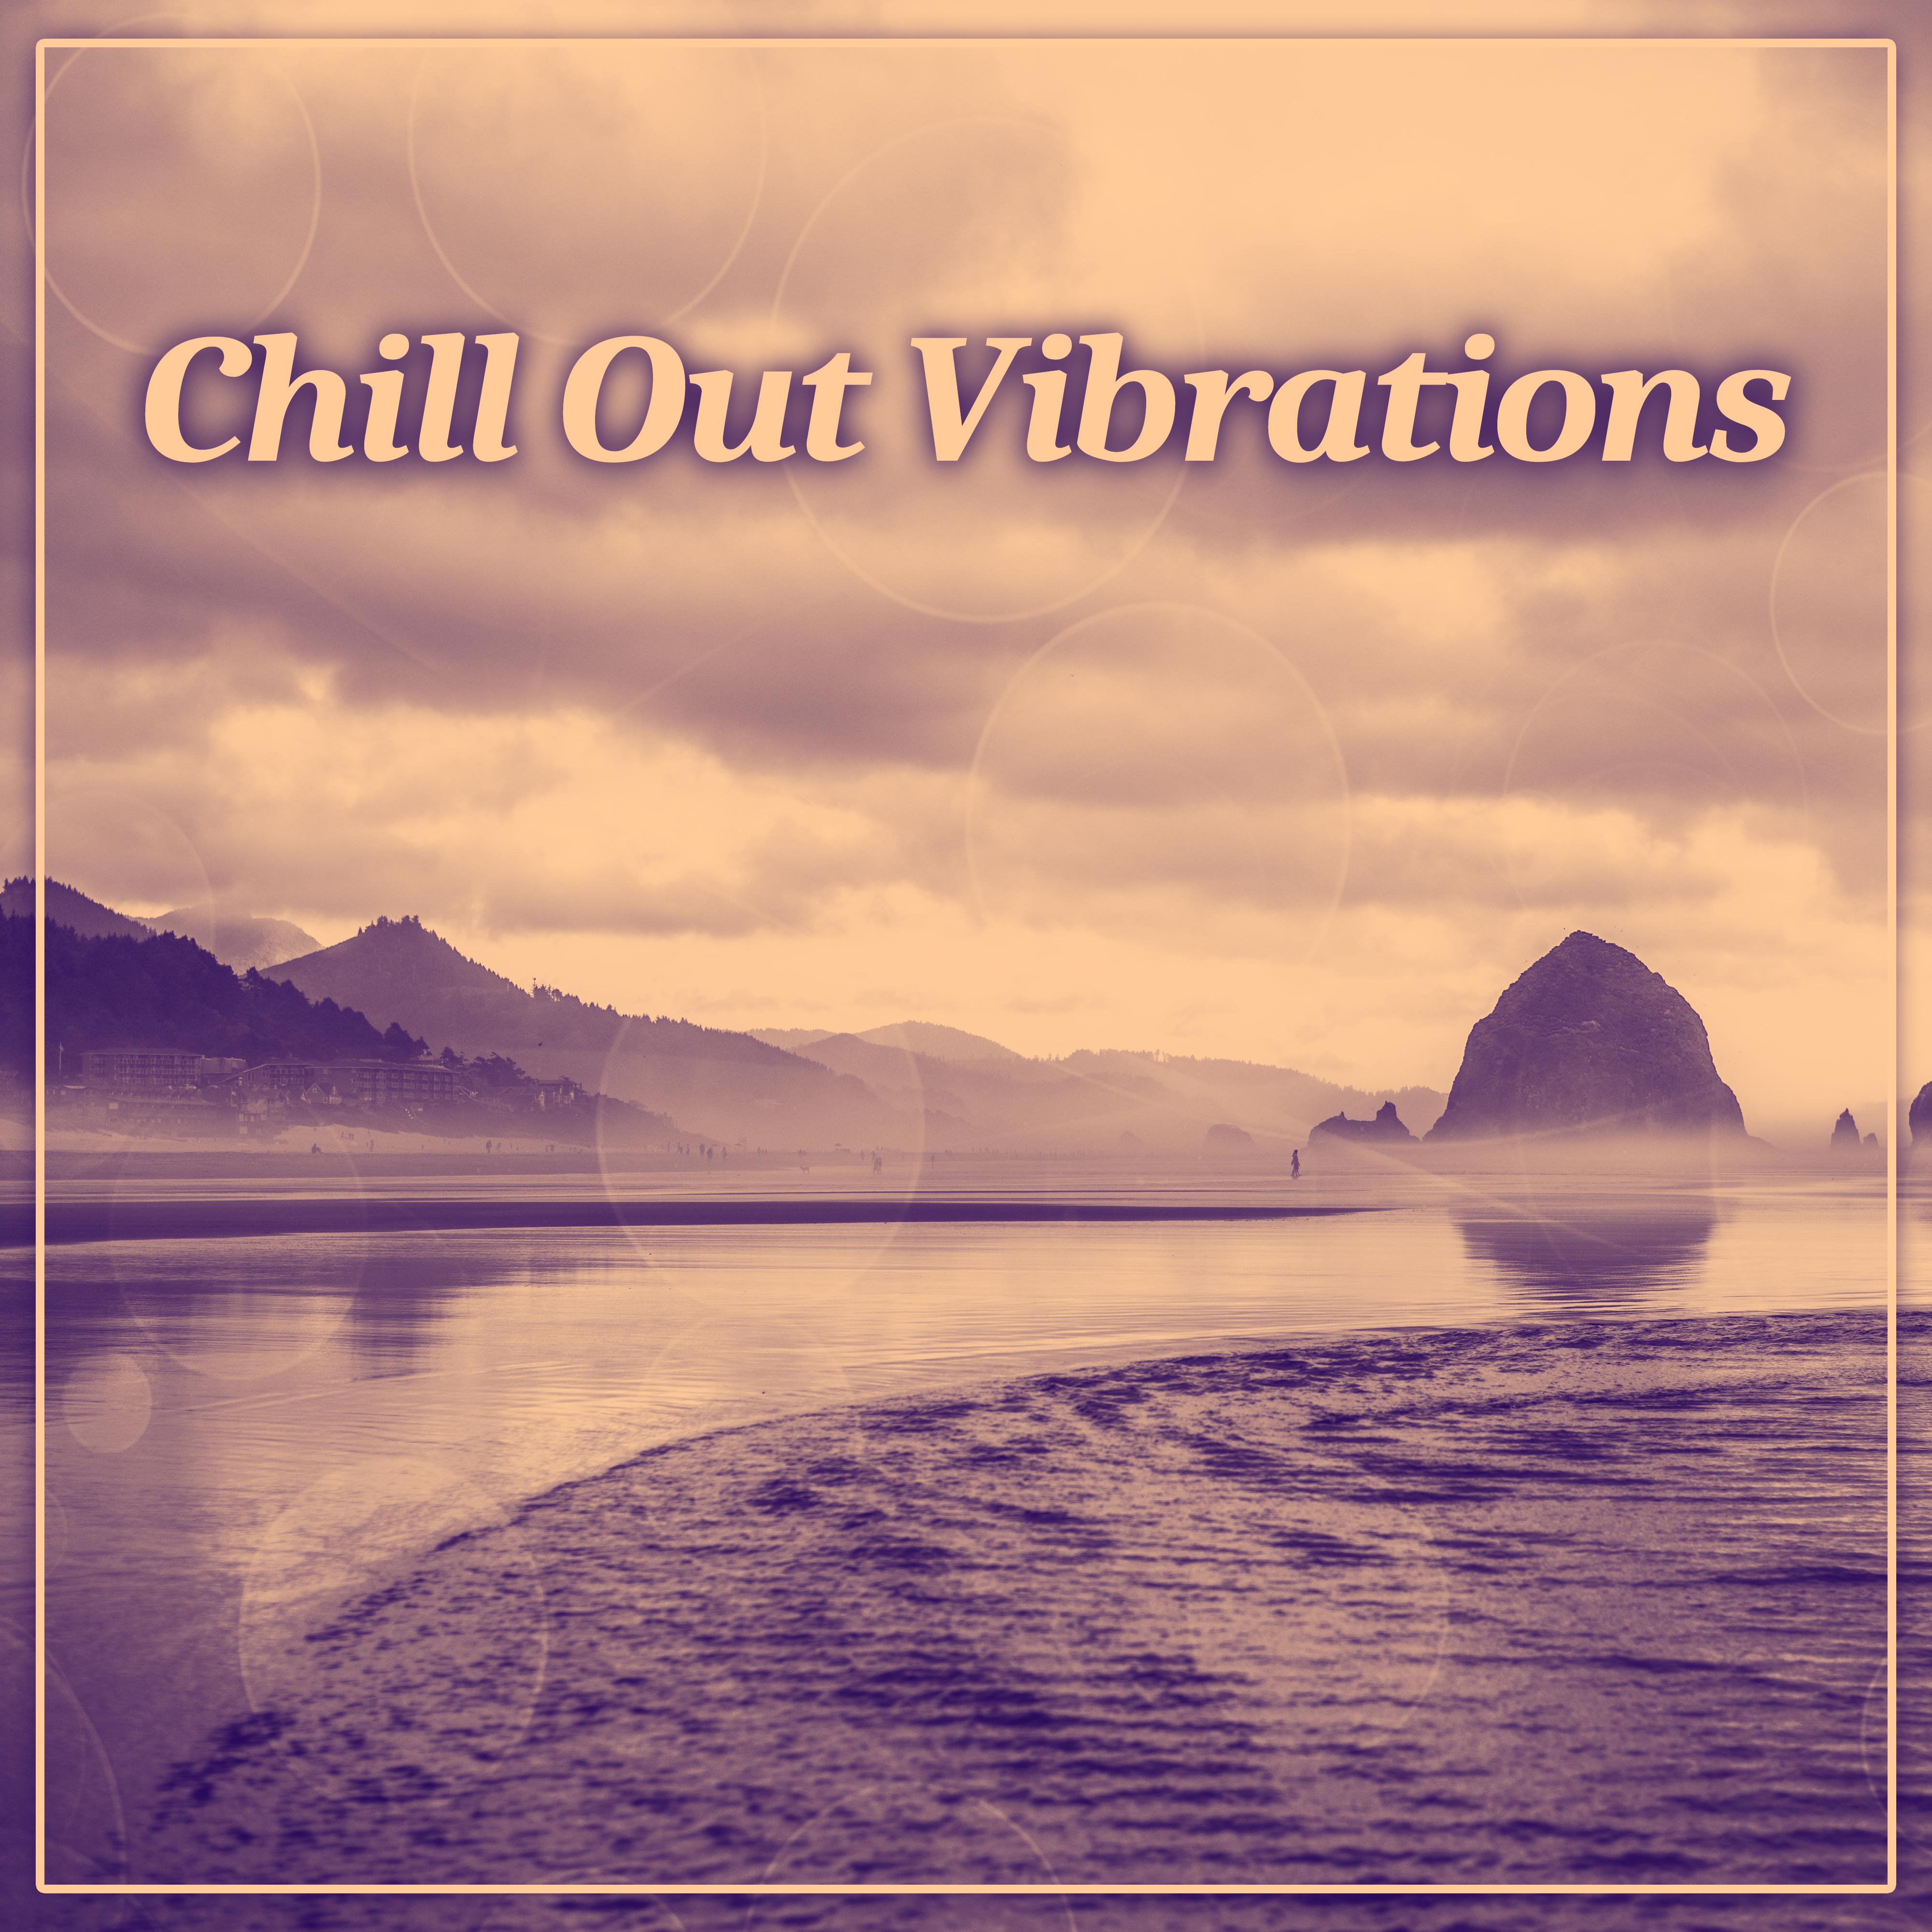 Chill Out Vibrations - Deep Chill Out Bounce, Dance Music, Cafe Lounge Music, Chillout on the Beach, Chilled Holidays, Chill Out Music